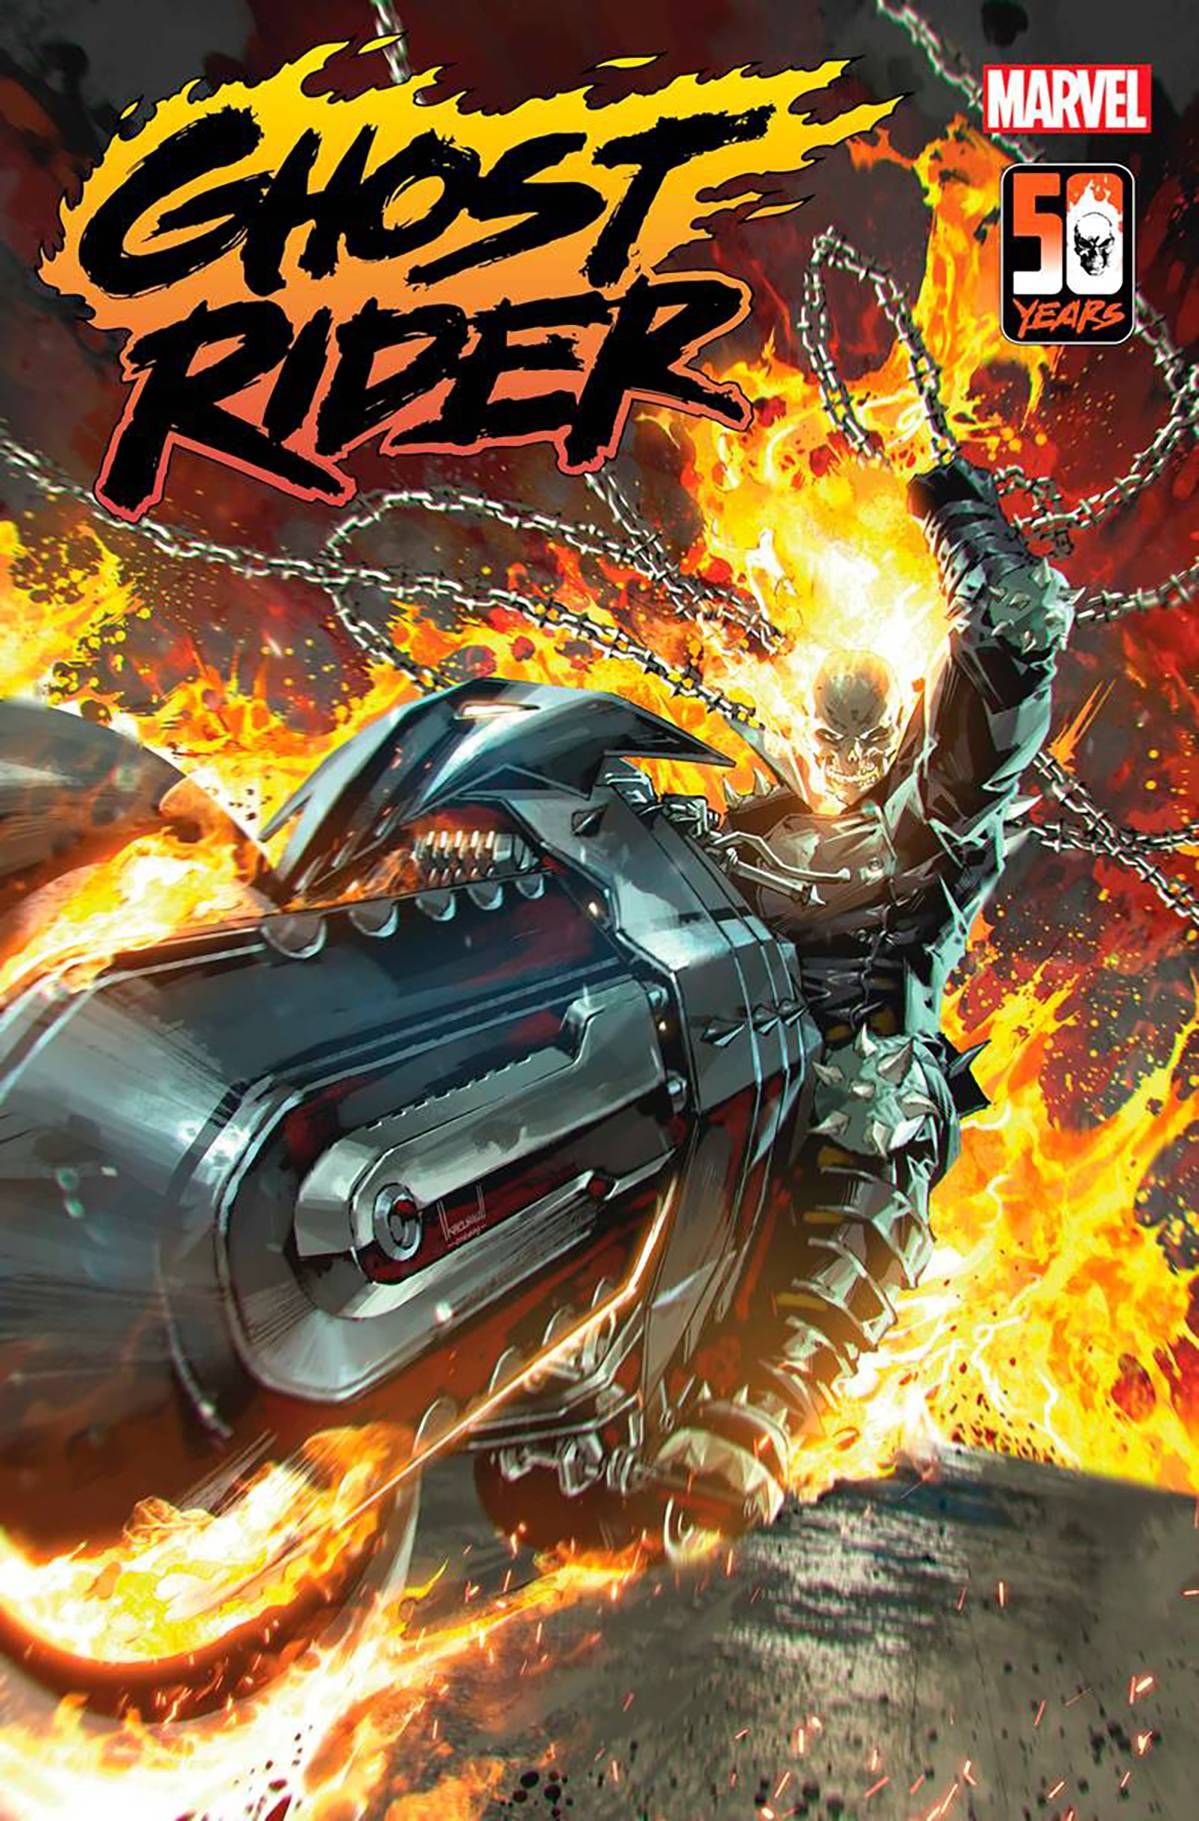 DF GHOST RIDER #1 PERCY GOLD SGN